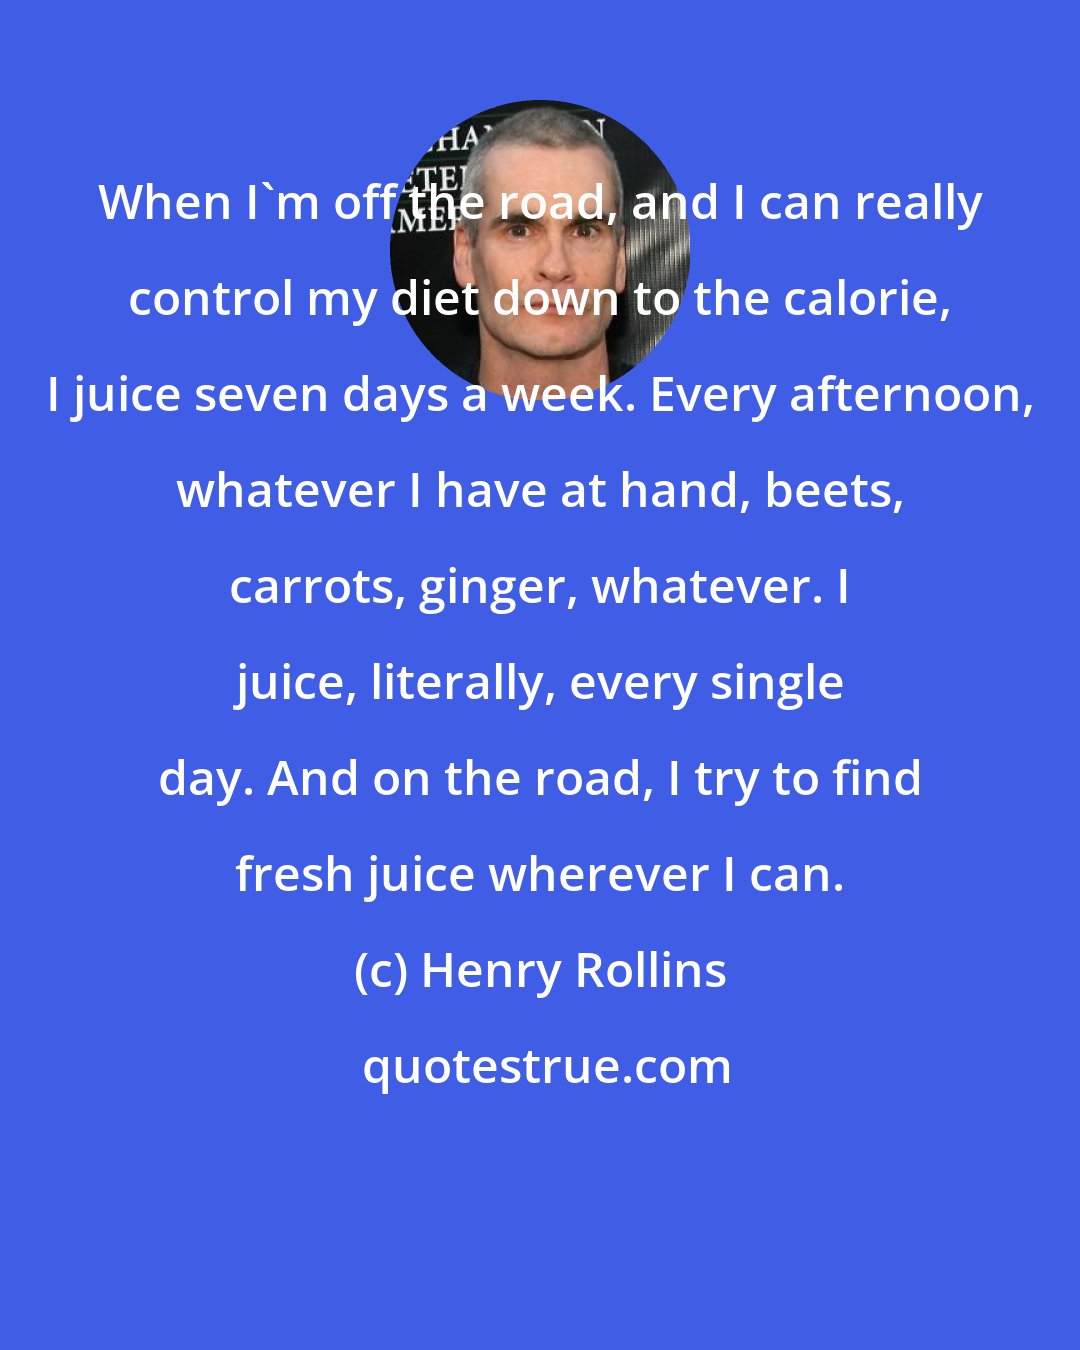 Henry Rollins: When I'm off the road, and I can really control my diet down to the calorie, I juice seven days a week. Every afternoon, whatever I have at hand, beets, carrots, ginger, whatever. I juice, literally, every single day. And on the road, I try to find fresh juice wherever I can.